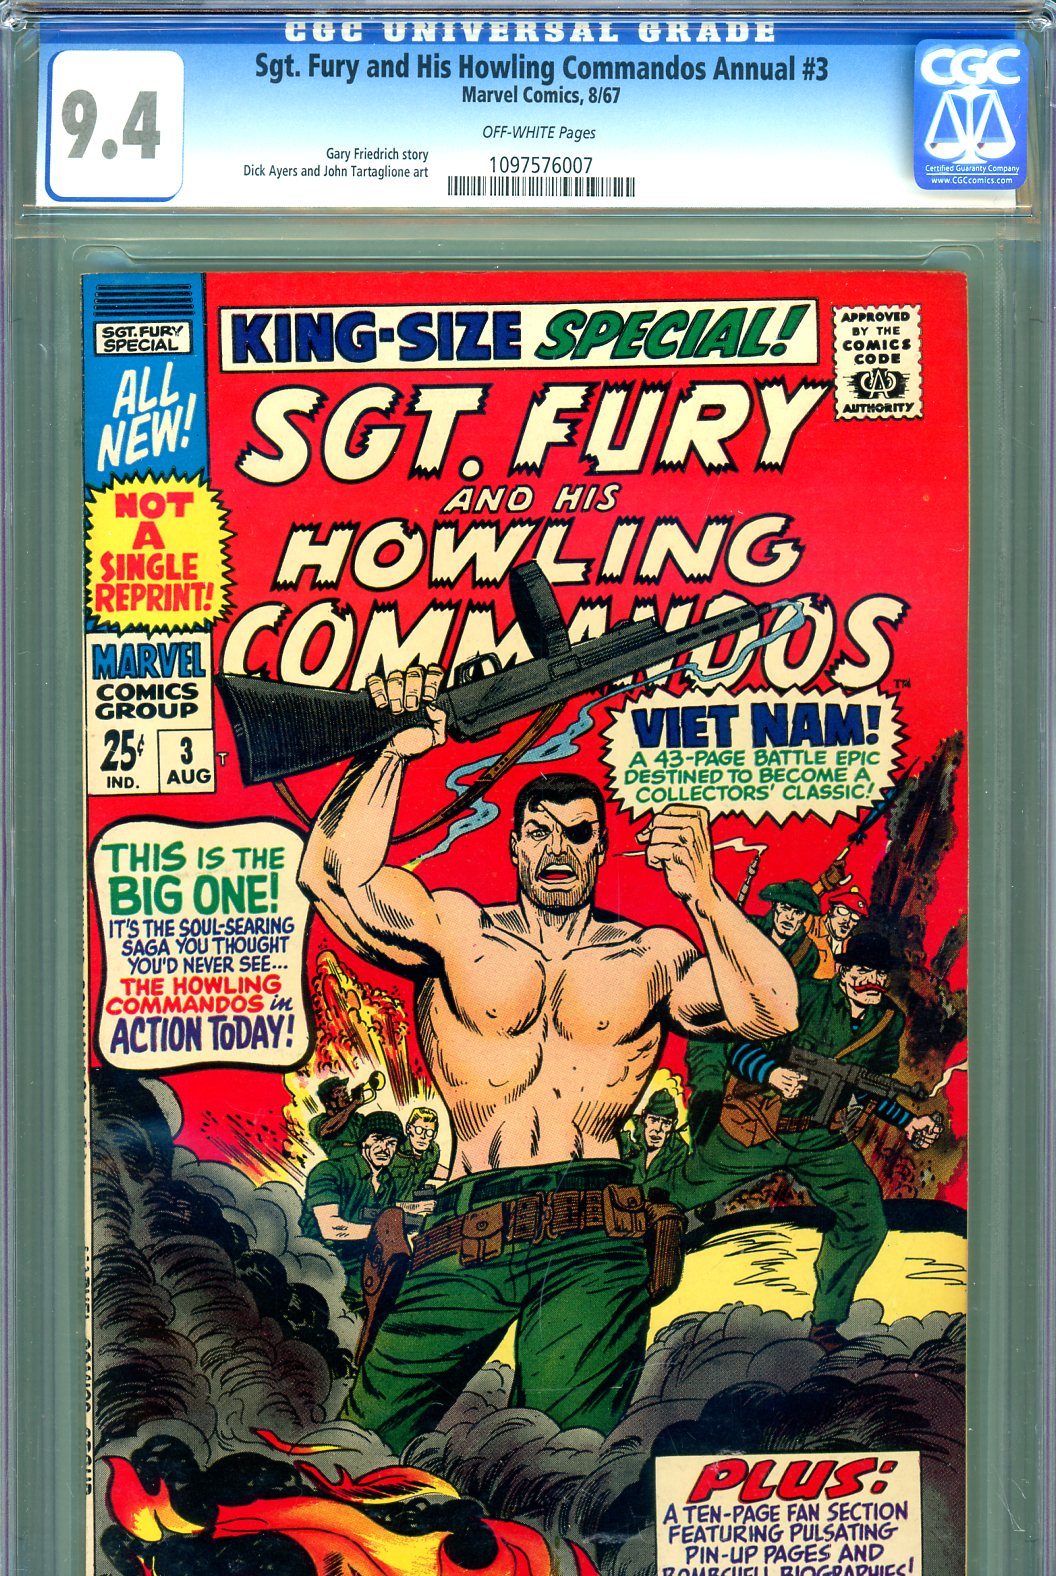 Sgt. Fury and His Howling Commandos Annual #3 CGC 9.4 ow